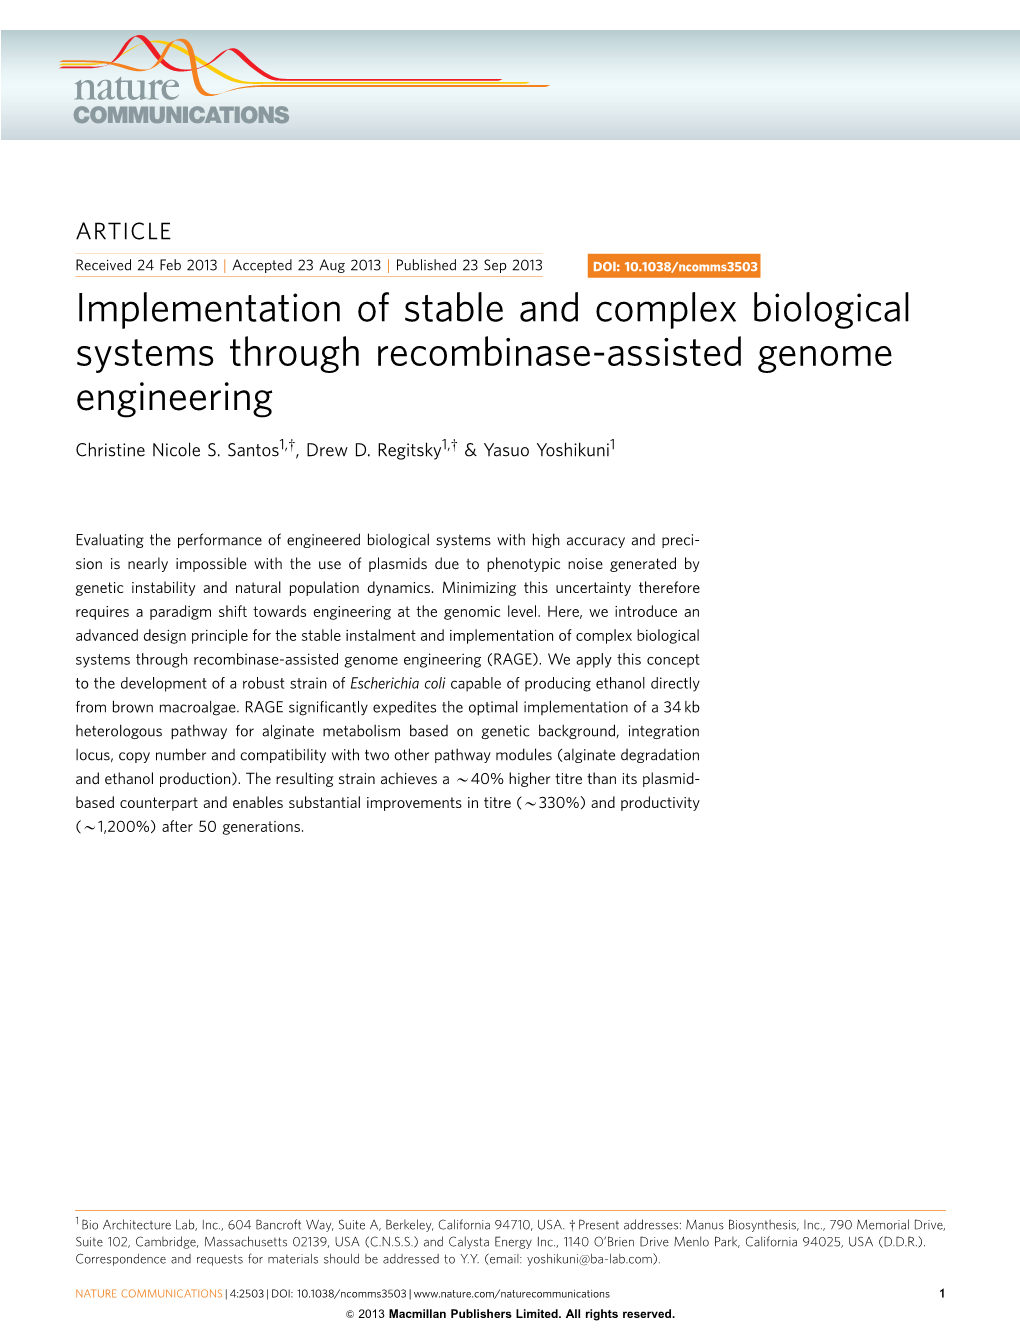 Implementation of Stable and Complex Biological Systems Through Recombinase-Assisted Genome Engineering